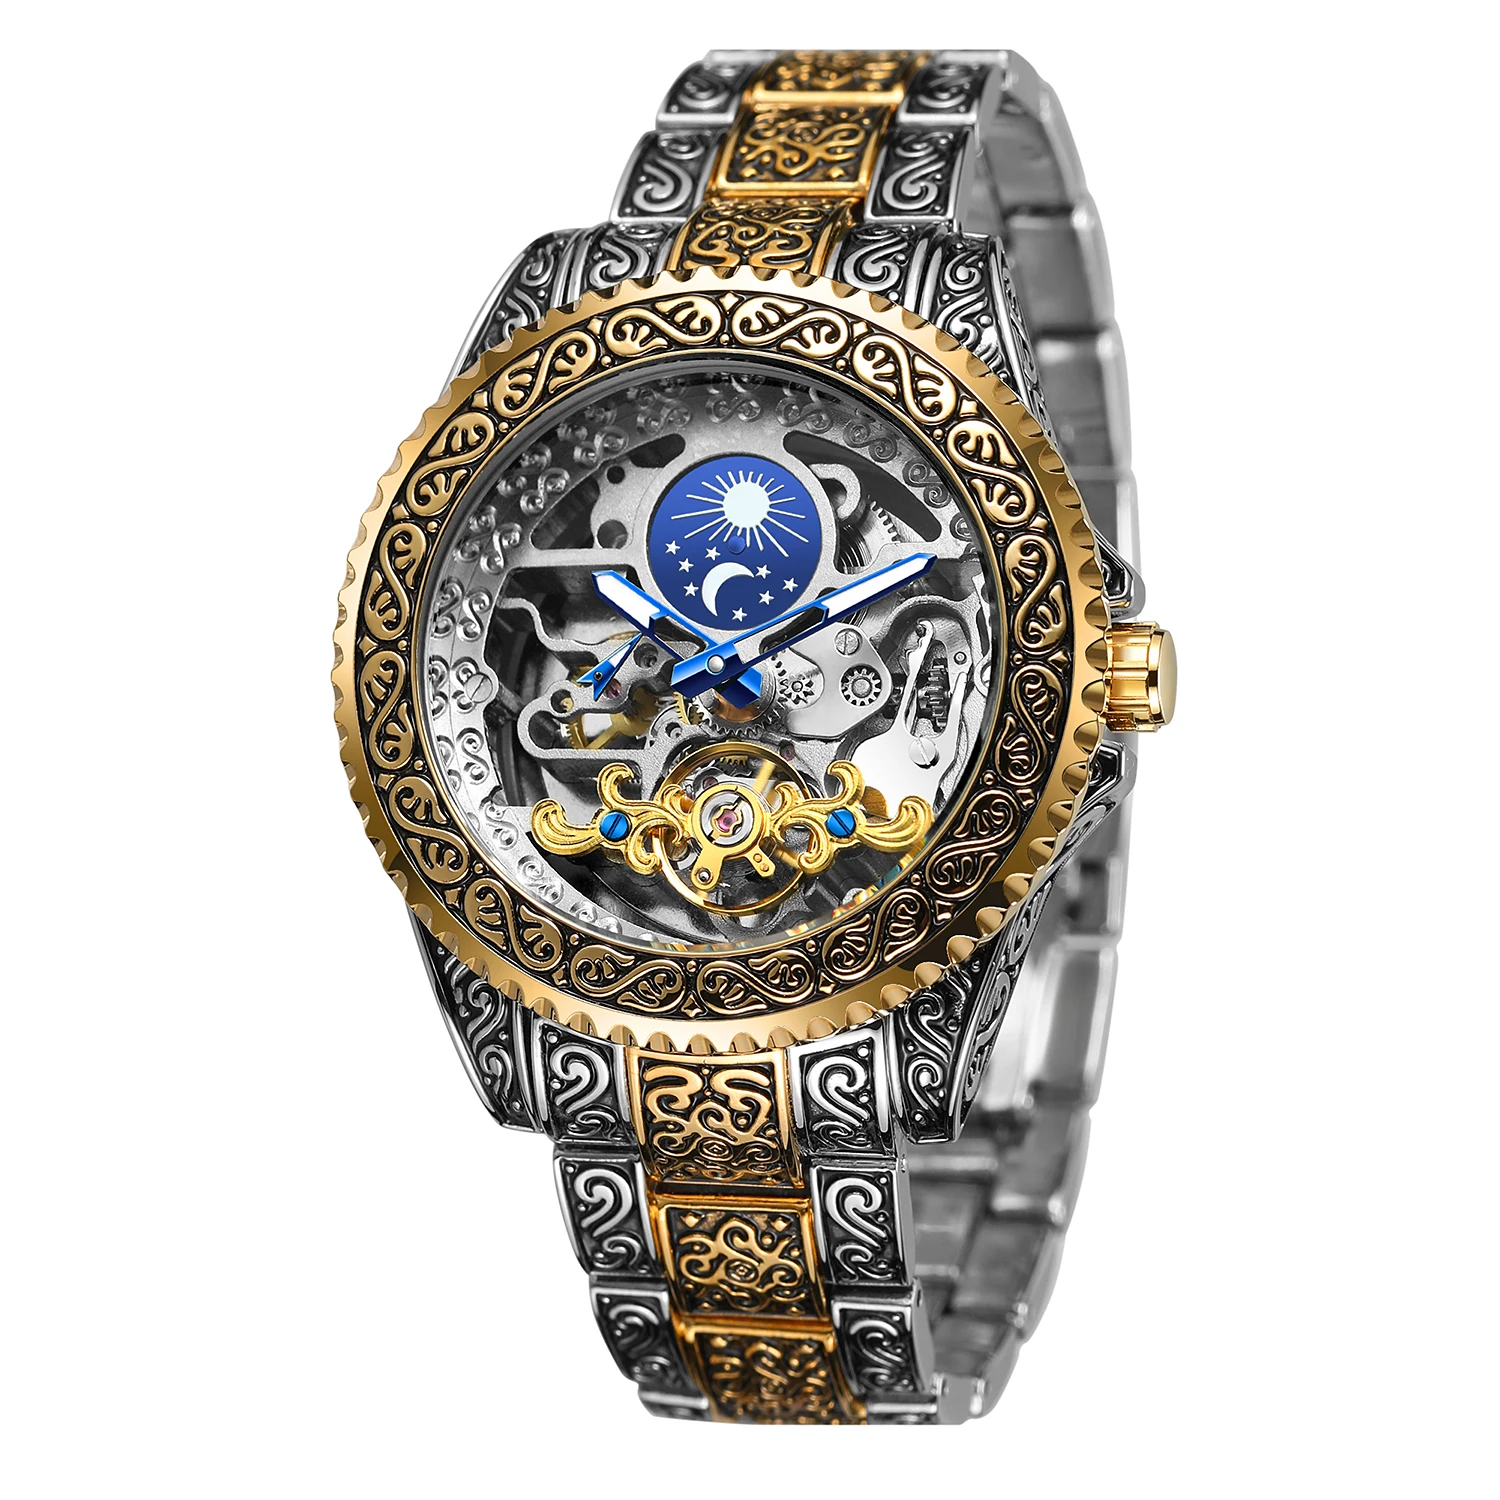 

Forsining Automatic Tourbillon Watch for Men Mechanical Skeleton Mens Watches Top Brand Luxury Engraved Vintage Moon Phase Steel